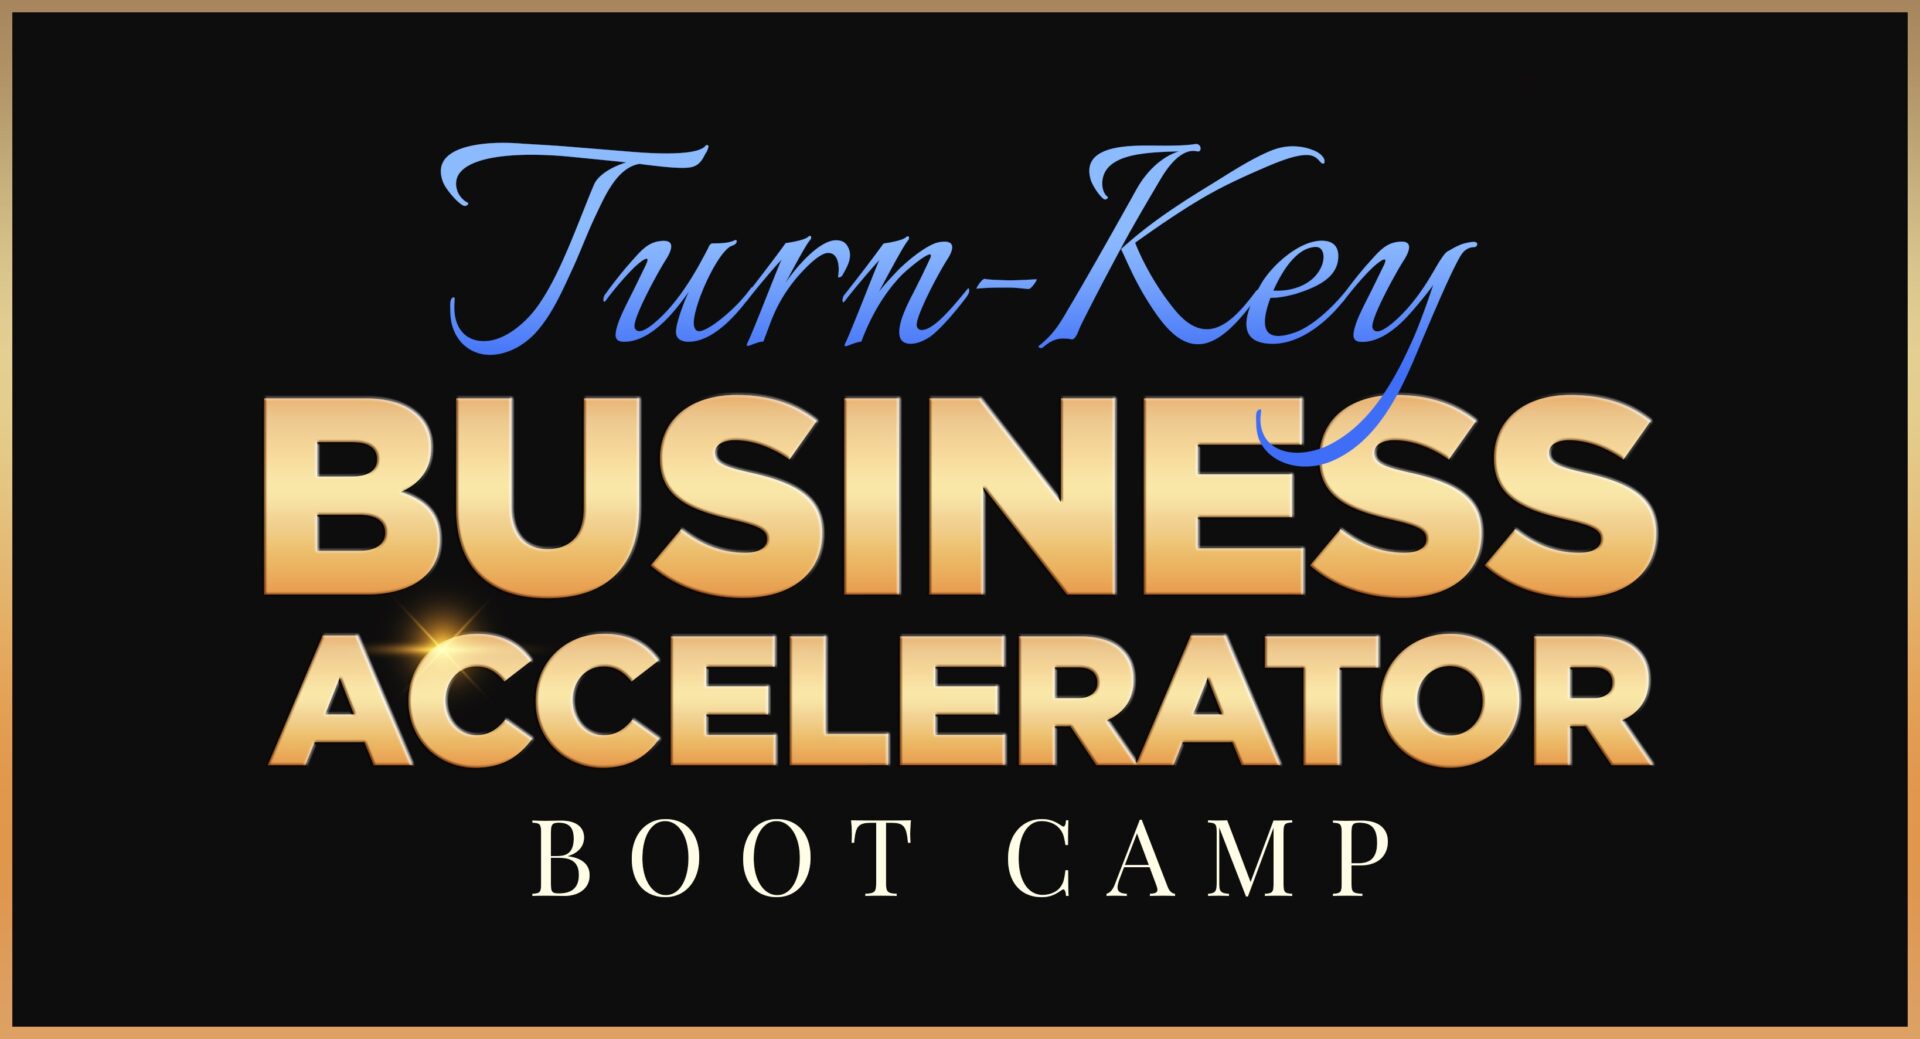 Turn-Key Business Accelerator Boot Camp